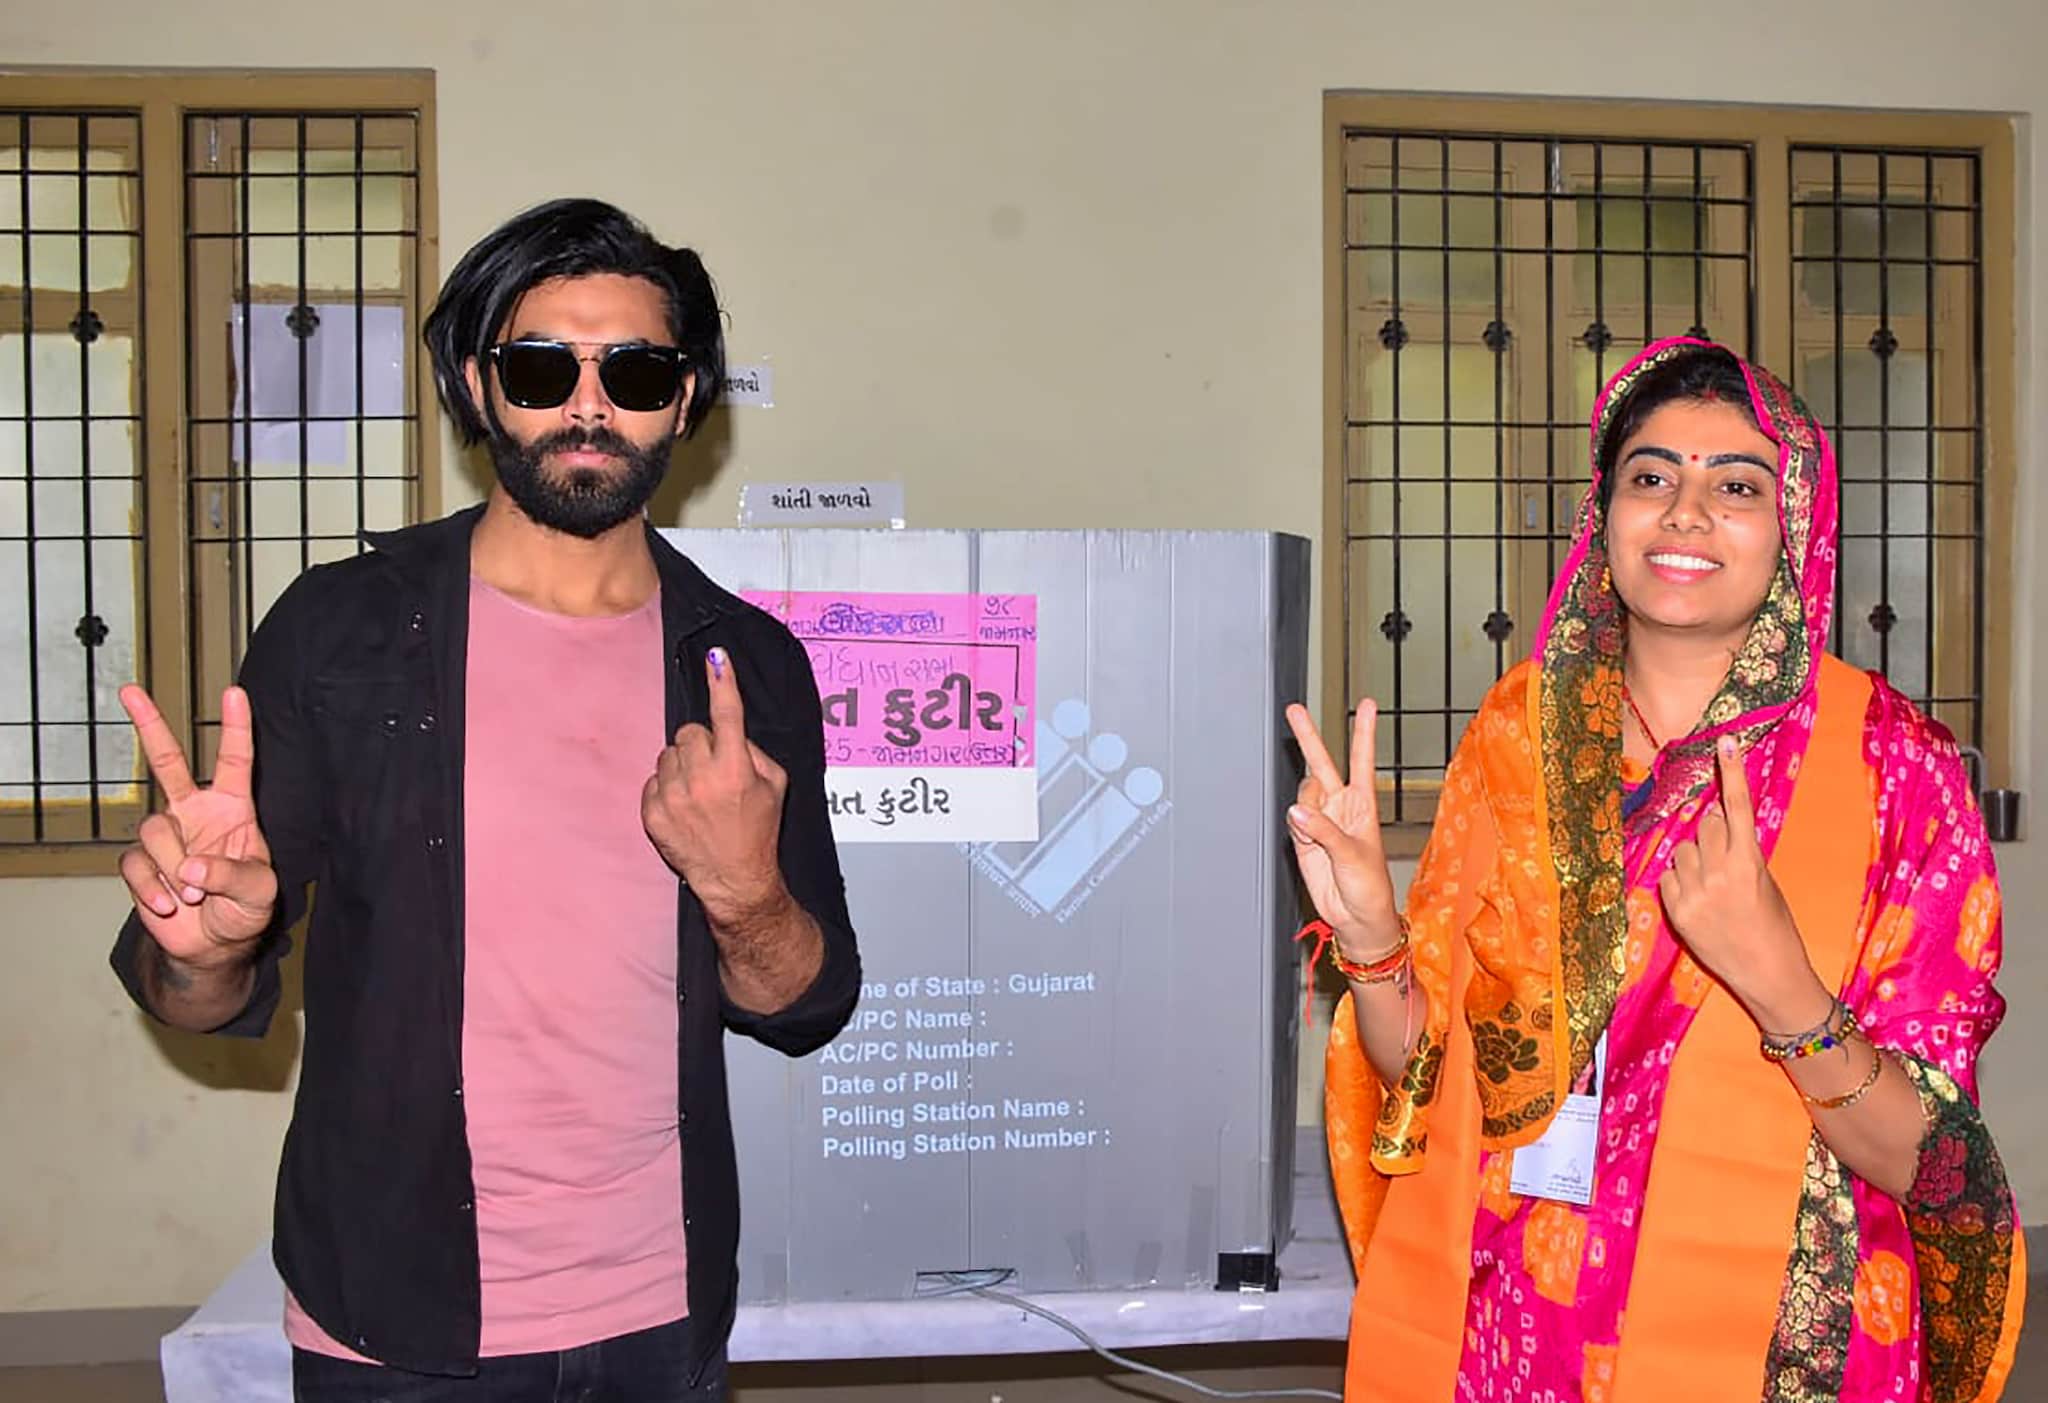 Jamnagar: Cricketer Ravindra Jadeja with his wife and BJP candidate Rivaba Jadeja after casting his vote during the first phase of Gujarat Assembly elections, in Jamnagar, Thursday, Dec. 1, 2022. (PTI Photo)(PTI12_01_2022_000056B)